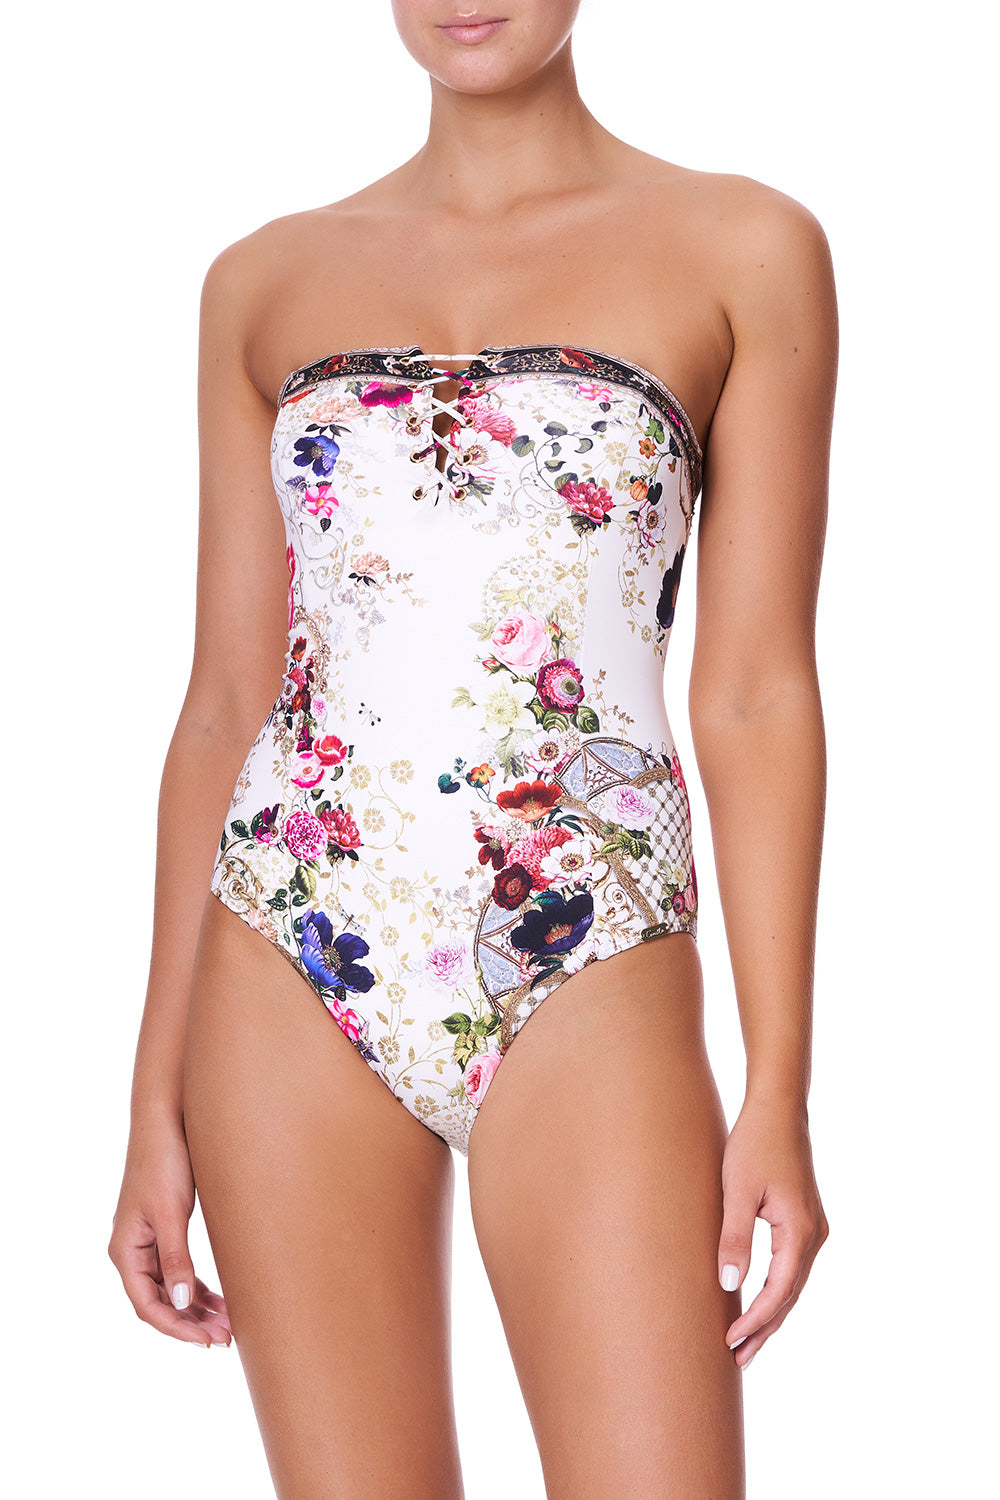 LACE UP FRONT BANDEEU ONE PIECE FAIRY GODMOTHER